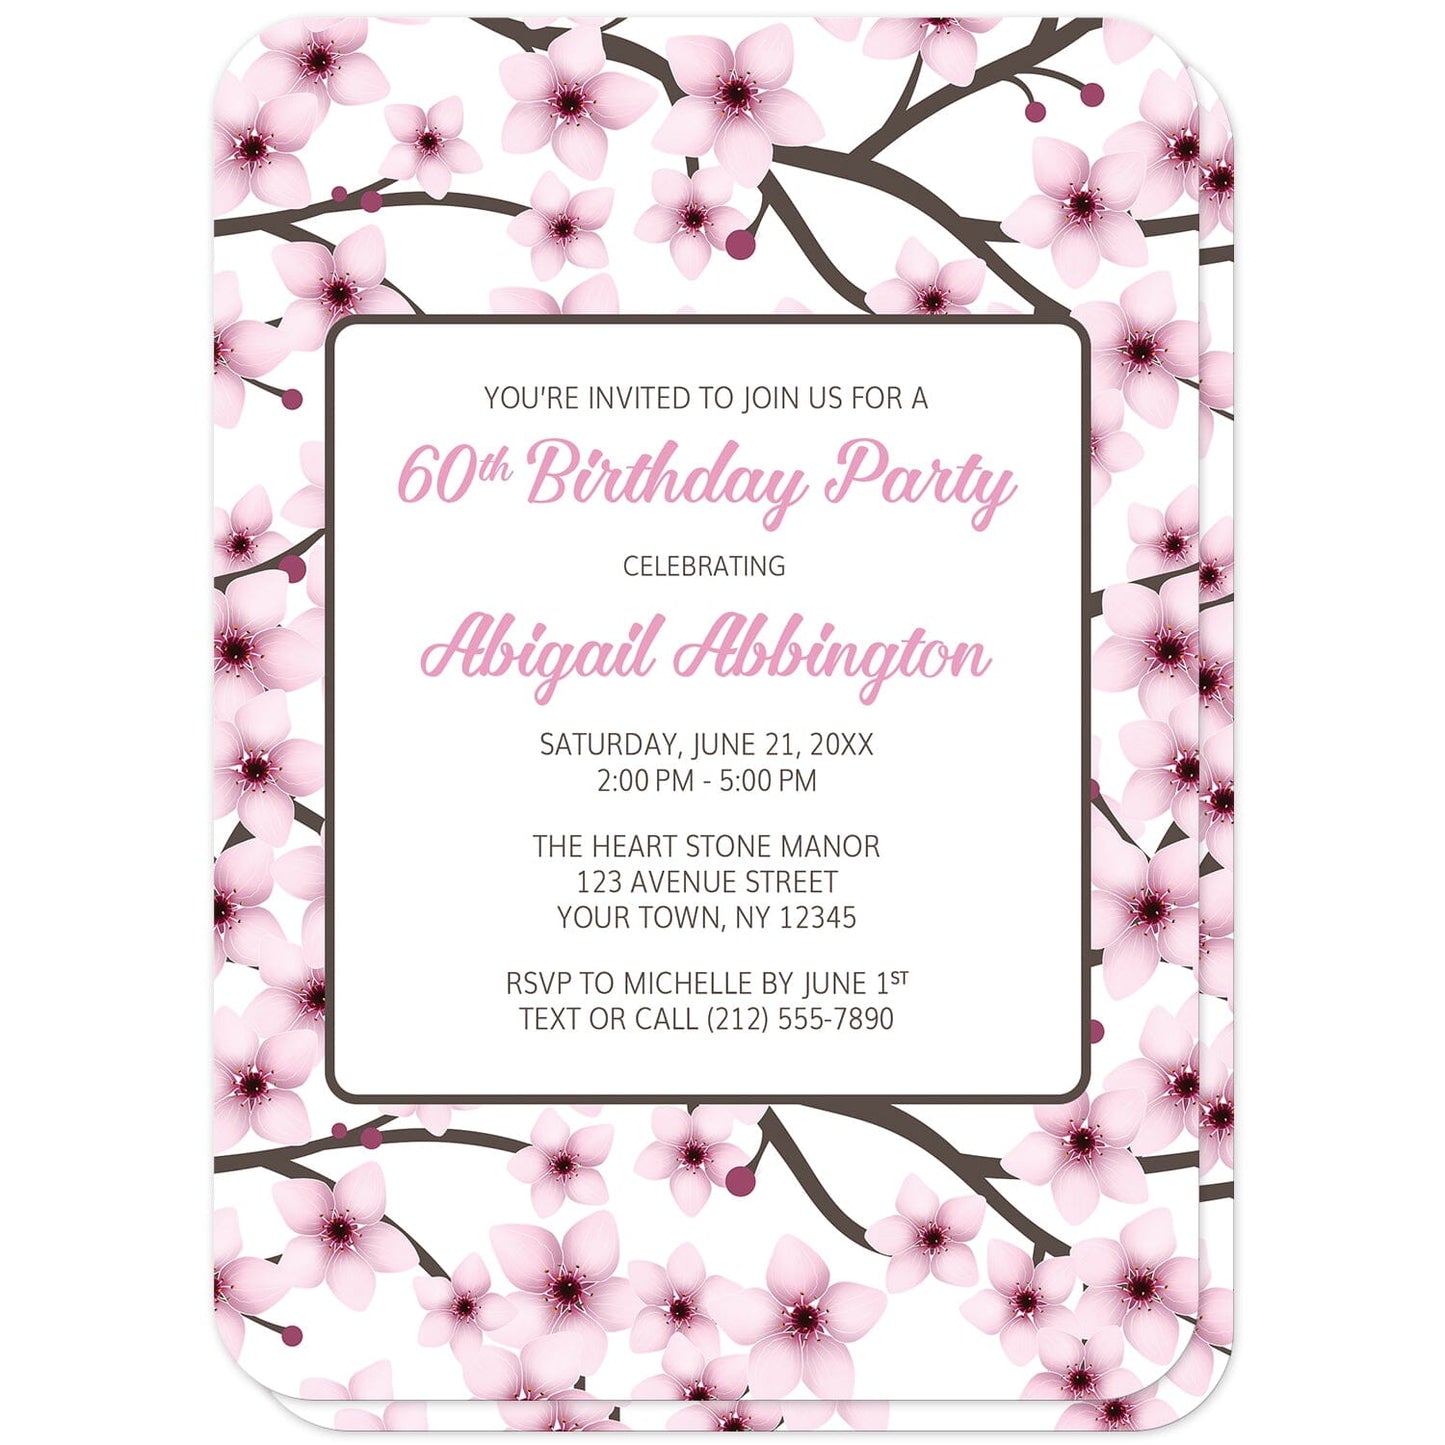 Cherry Blossom Birthday Party Invitations (front with rounded corners) at Artistically Invited. Cherry blossom birthday party invitations designed with a gorgeous pattern of pink cherry blossom branches. This beautiful floral background design is also printed on the back side of the invitations. Personalize these invitations with your birthday celebration details in pink and dark brown in a white rectangular area over the pretty cherry blossoms. 